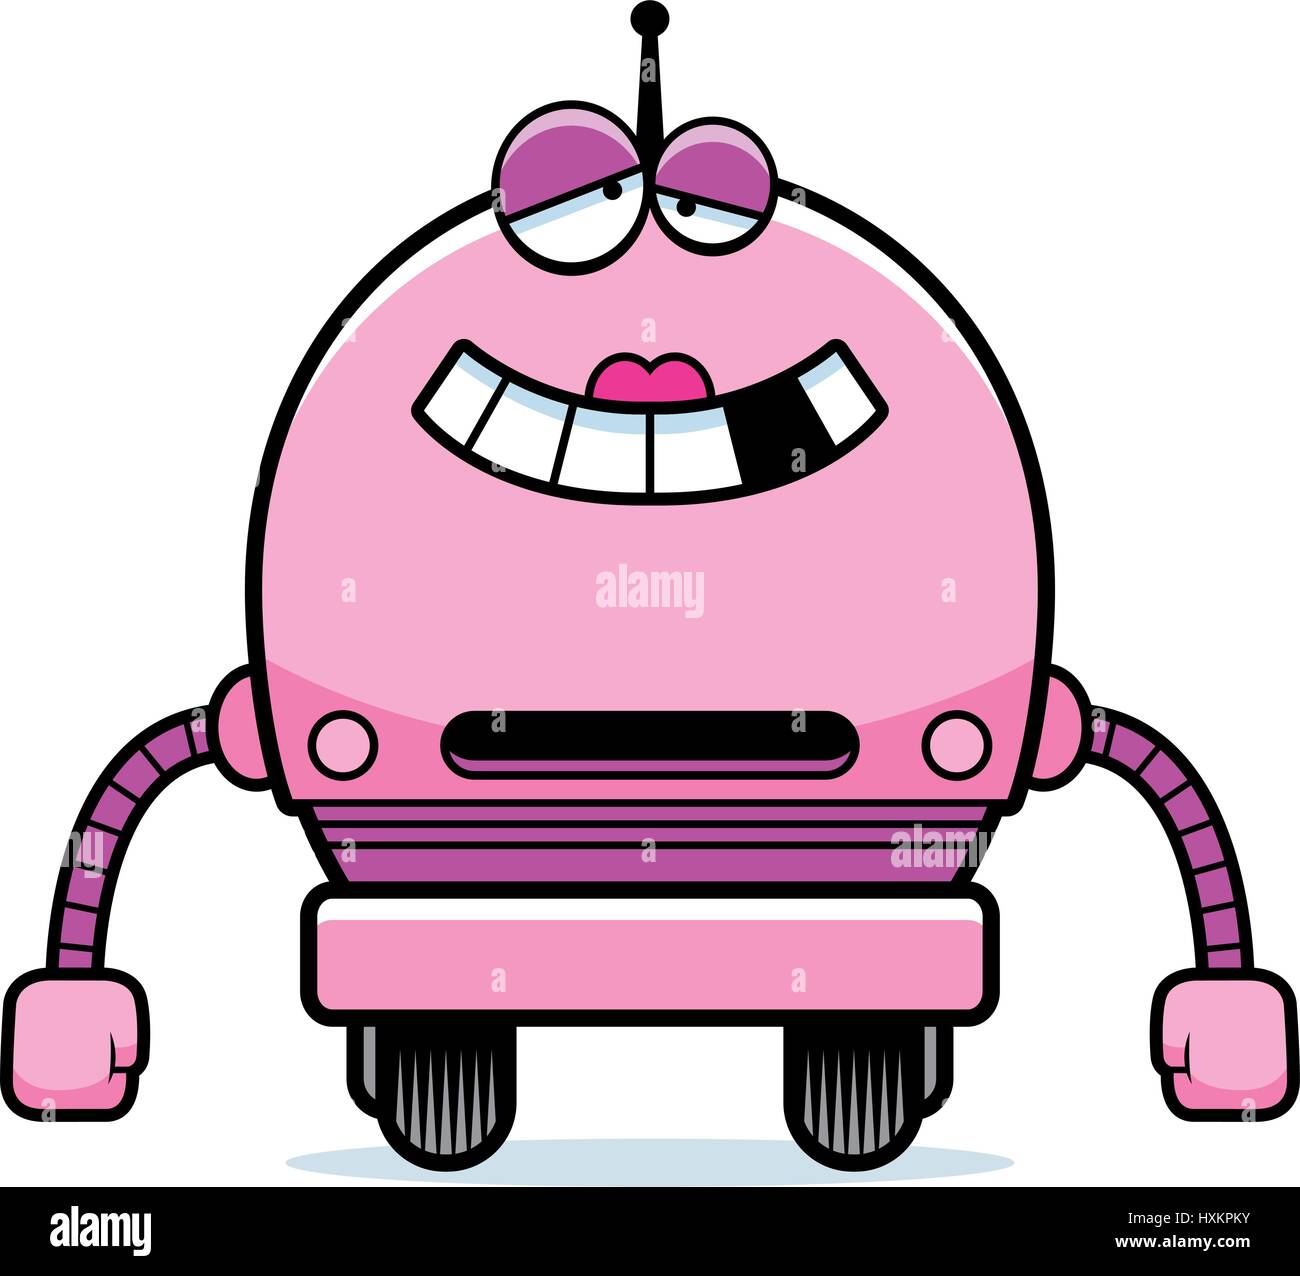 A cartoon illustration of a malfunctioning female pink robot. Stock Vector